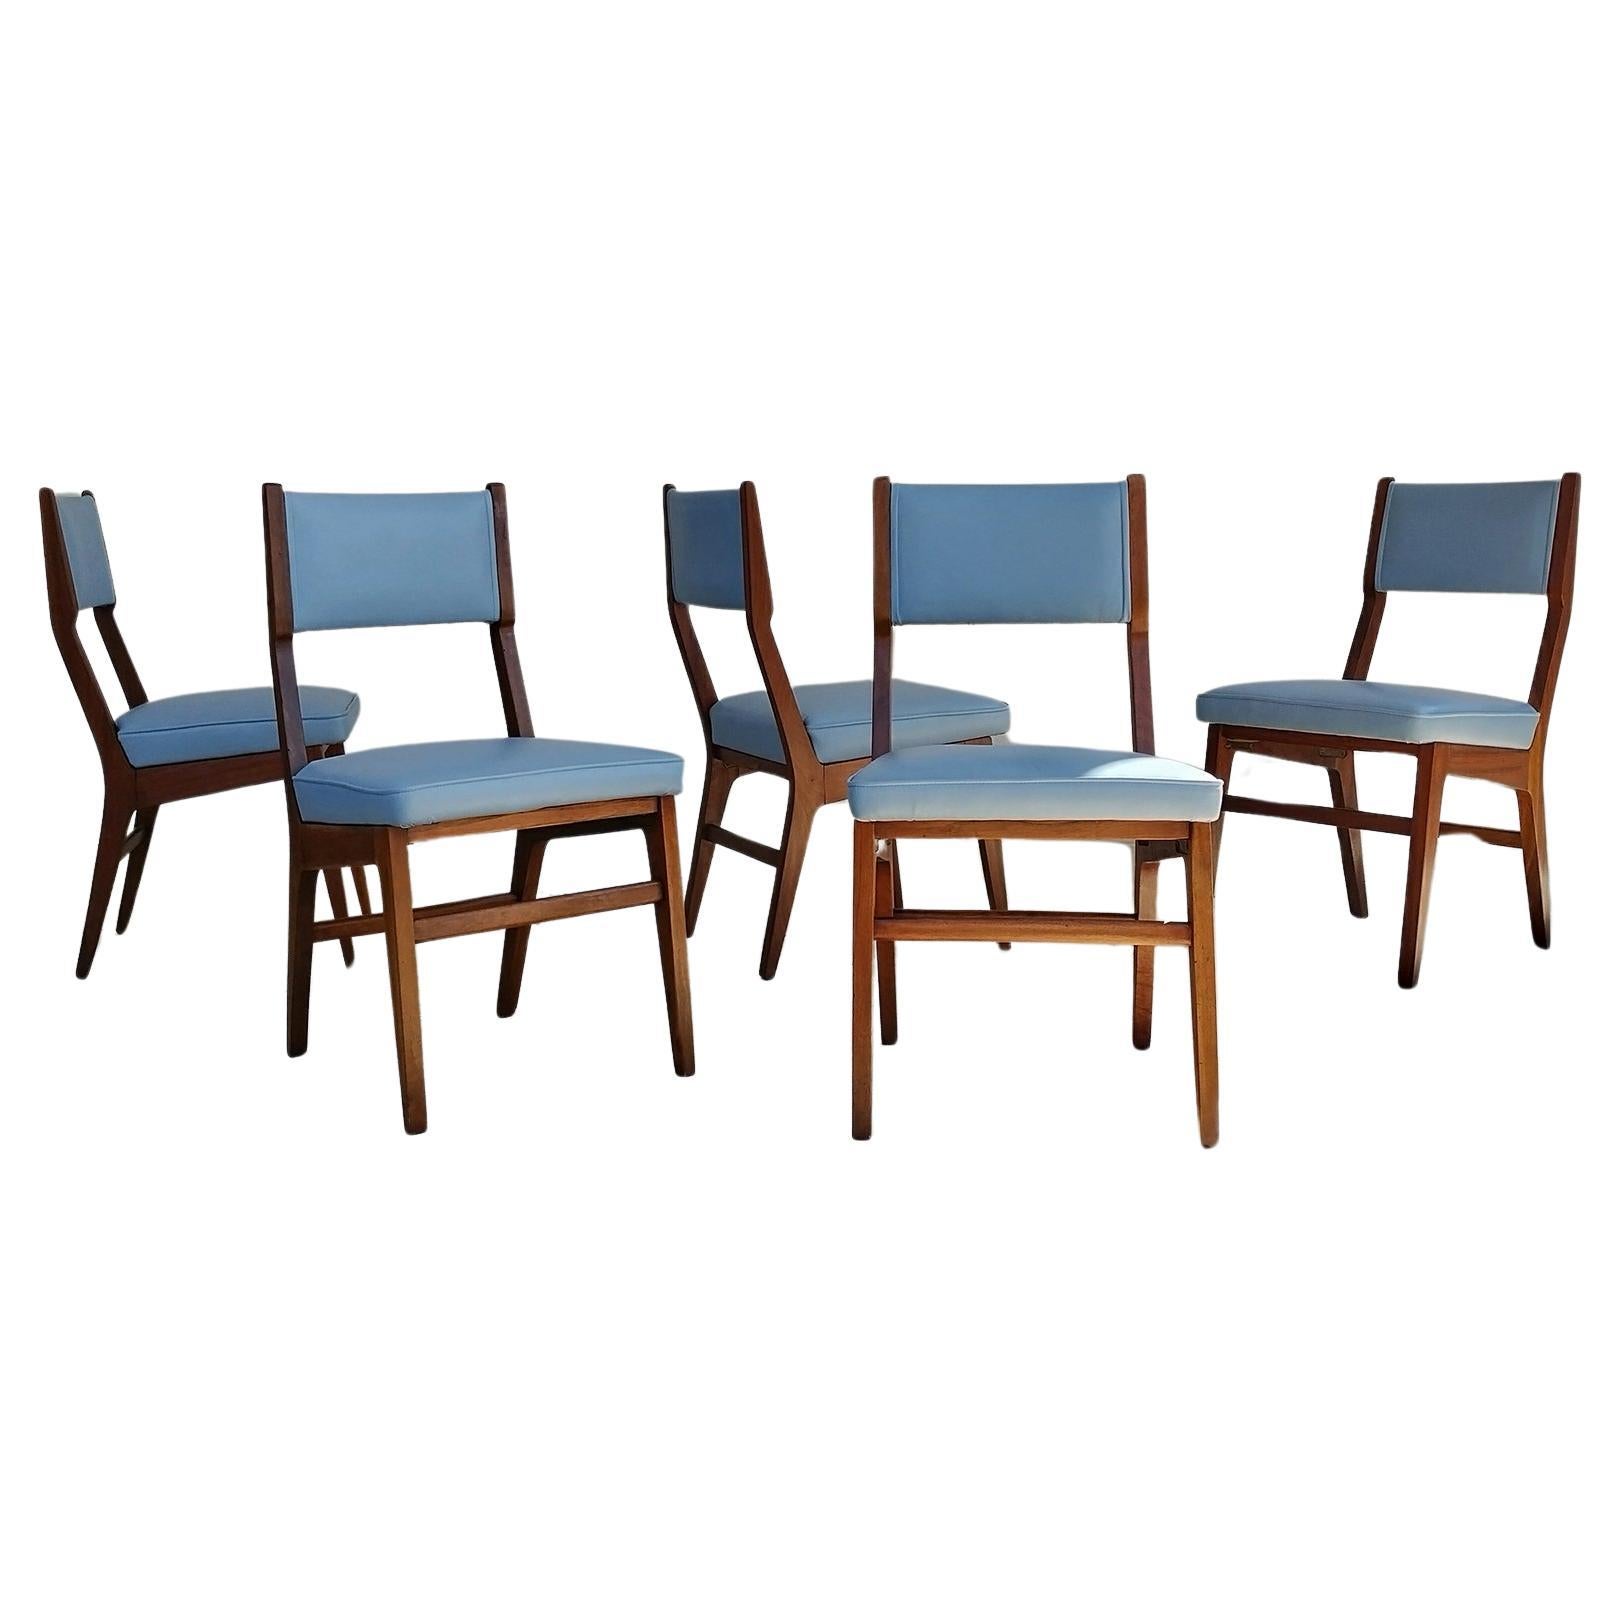 Set of Five I.S.A. Bergamo Chairs Attributed to Gio Ponti 1950s For Sale